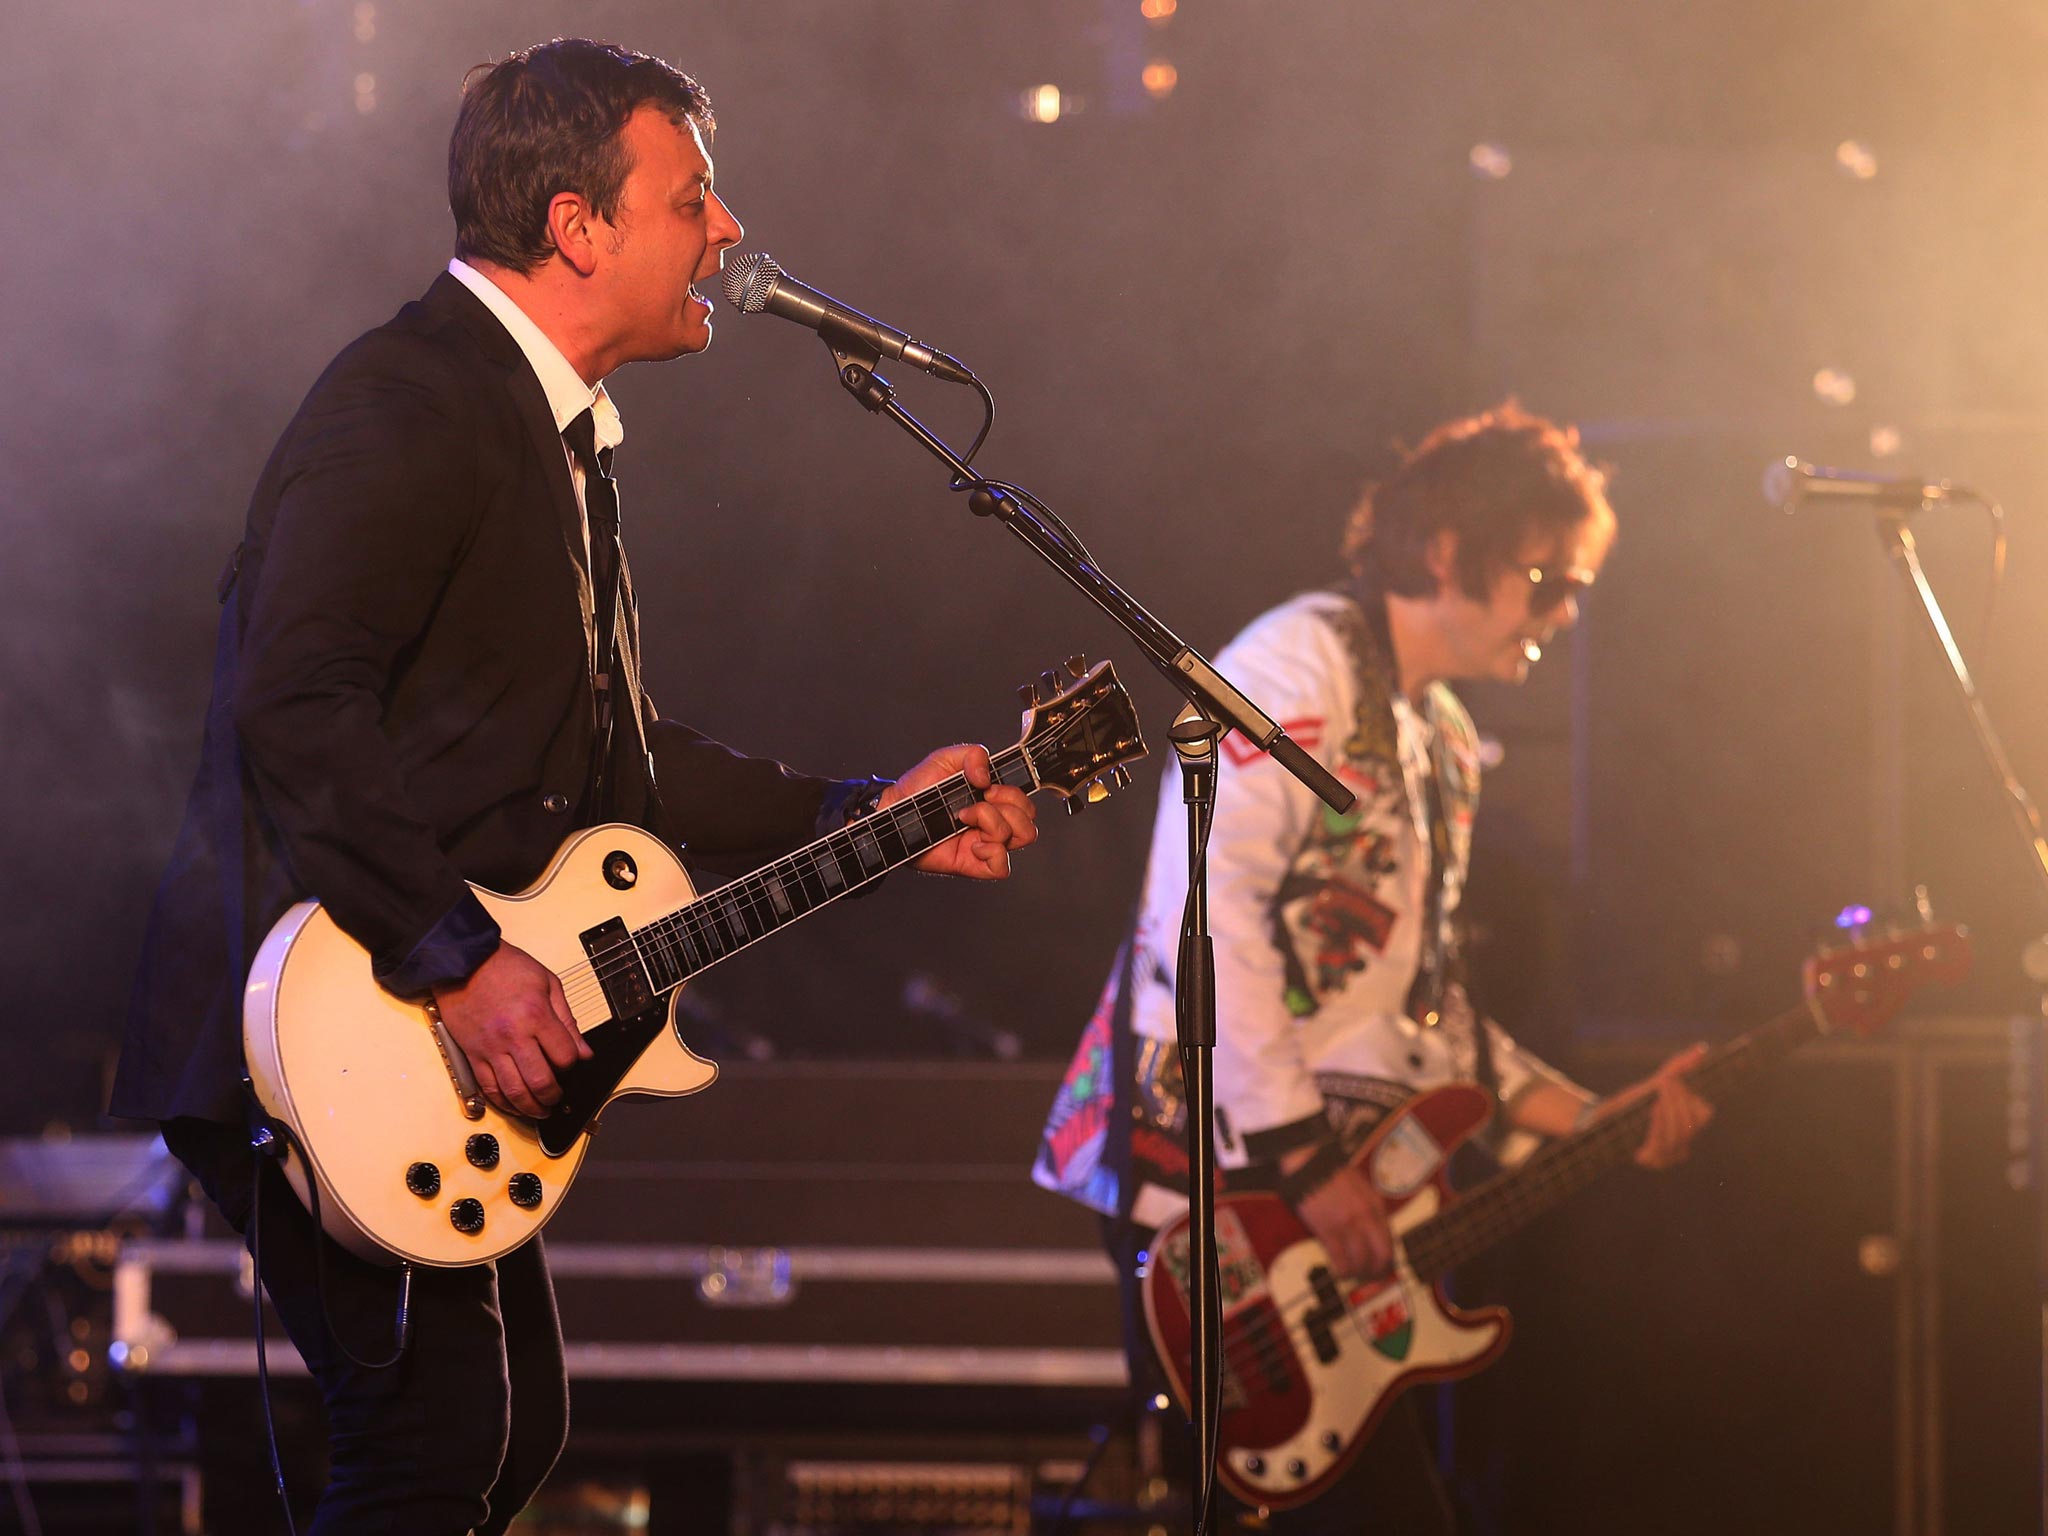 Manic Street Preachers playing at T in the Park in July